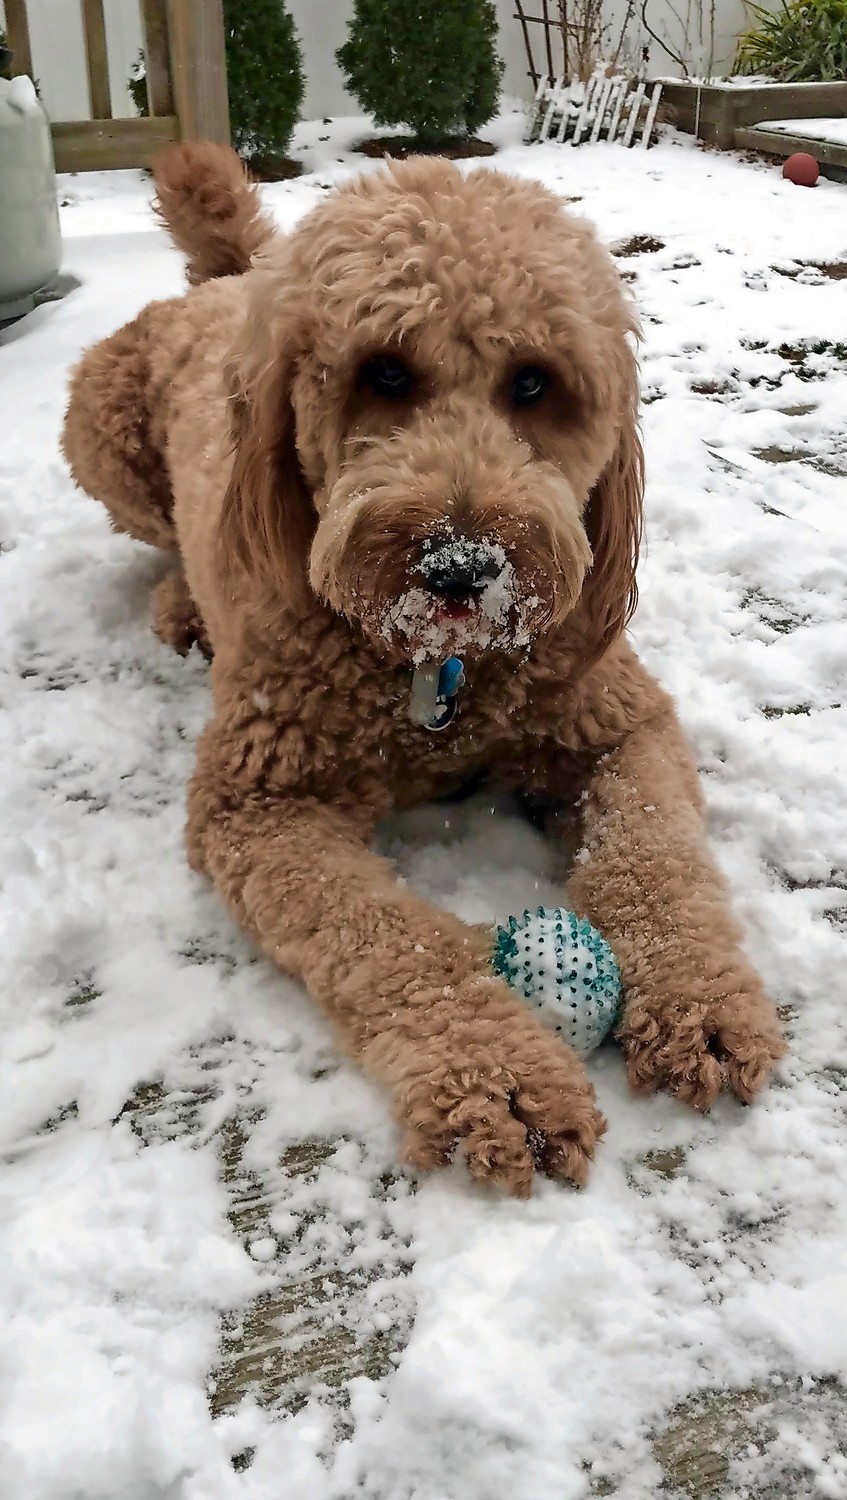 Jax, a 2-year-old goldendoodle, had fun playing in the first snowfall of the year outside of his home in North Wantagh last week.